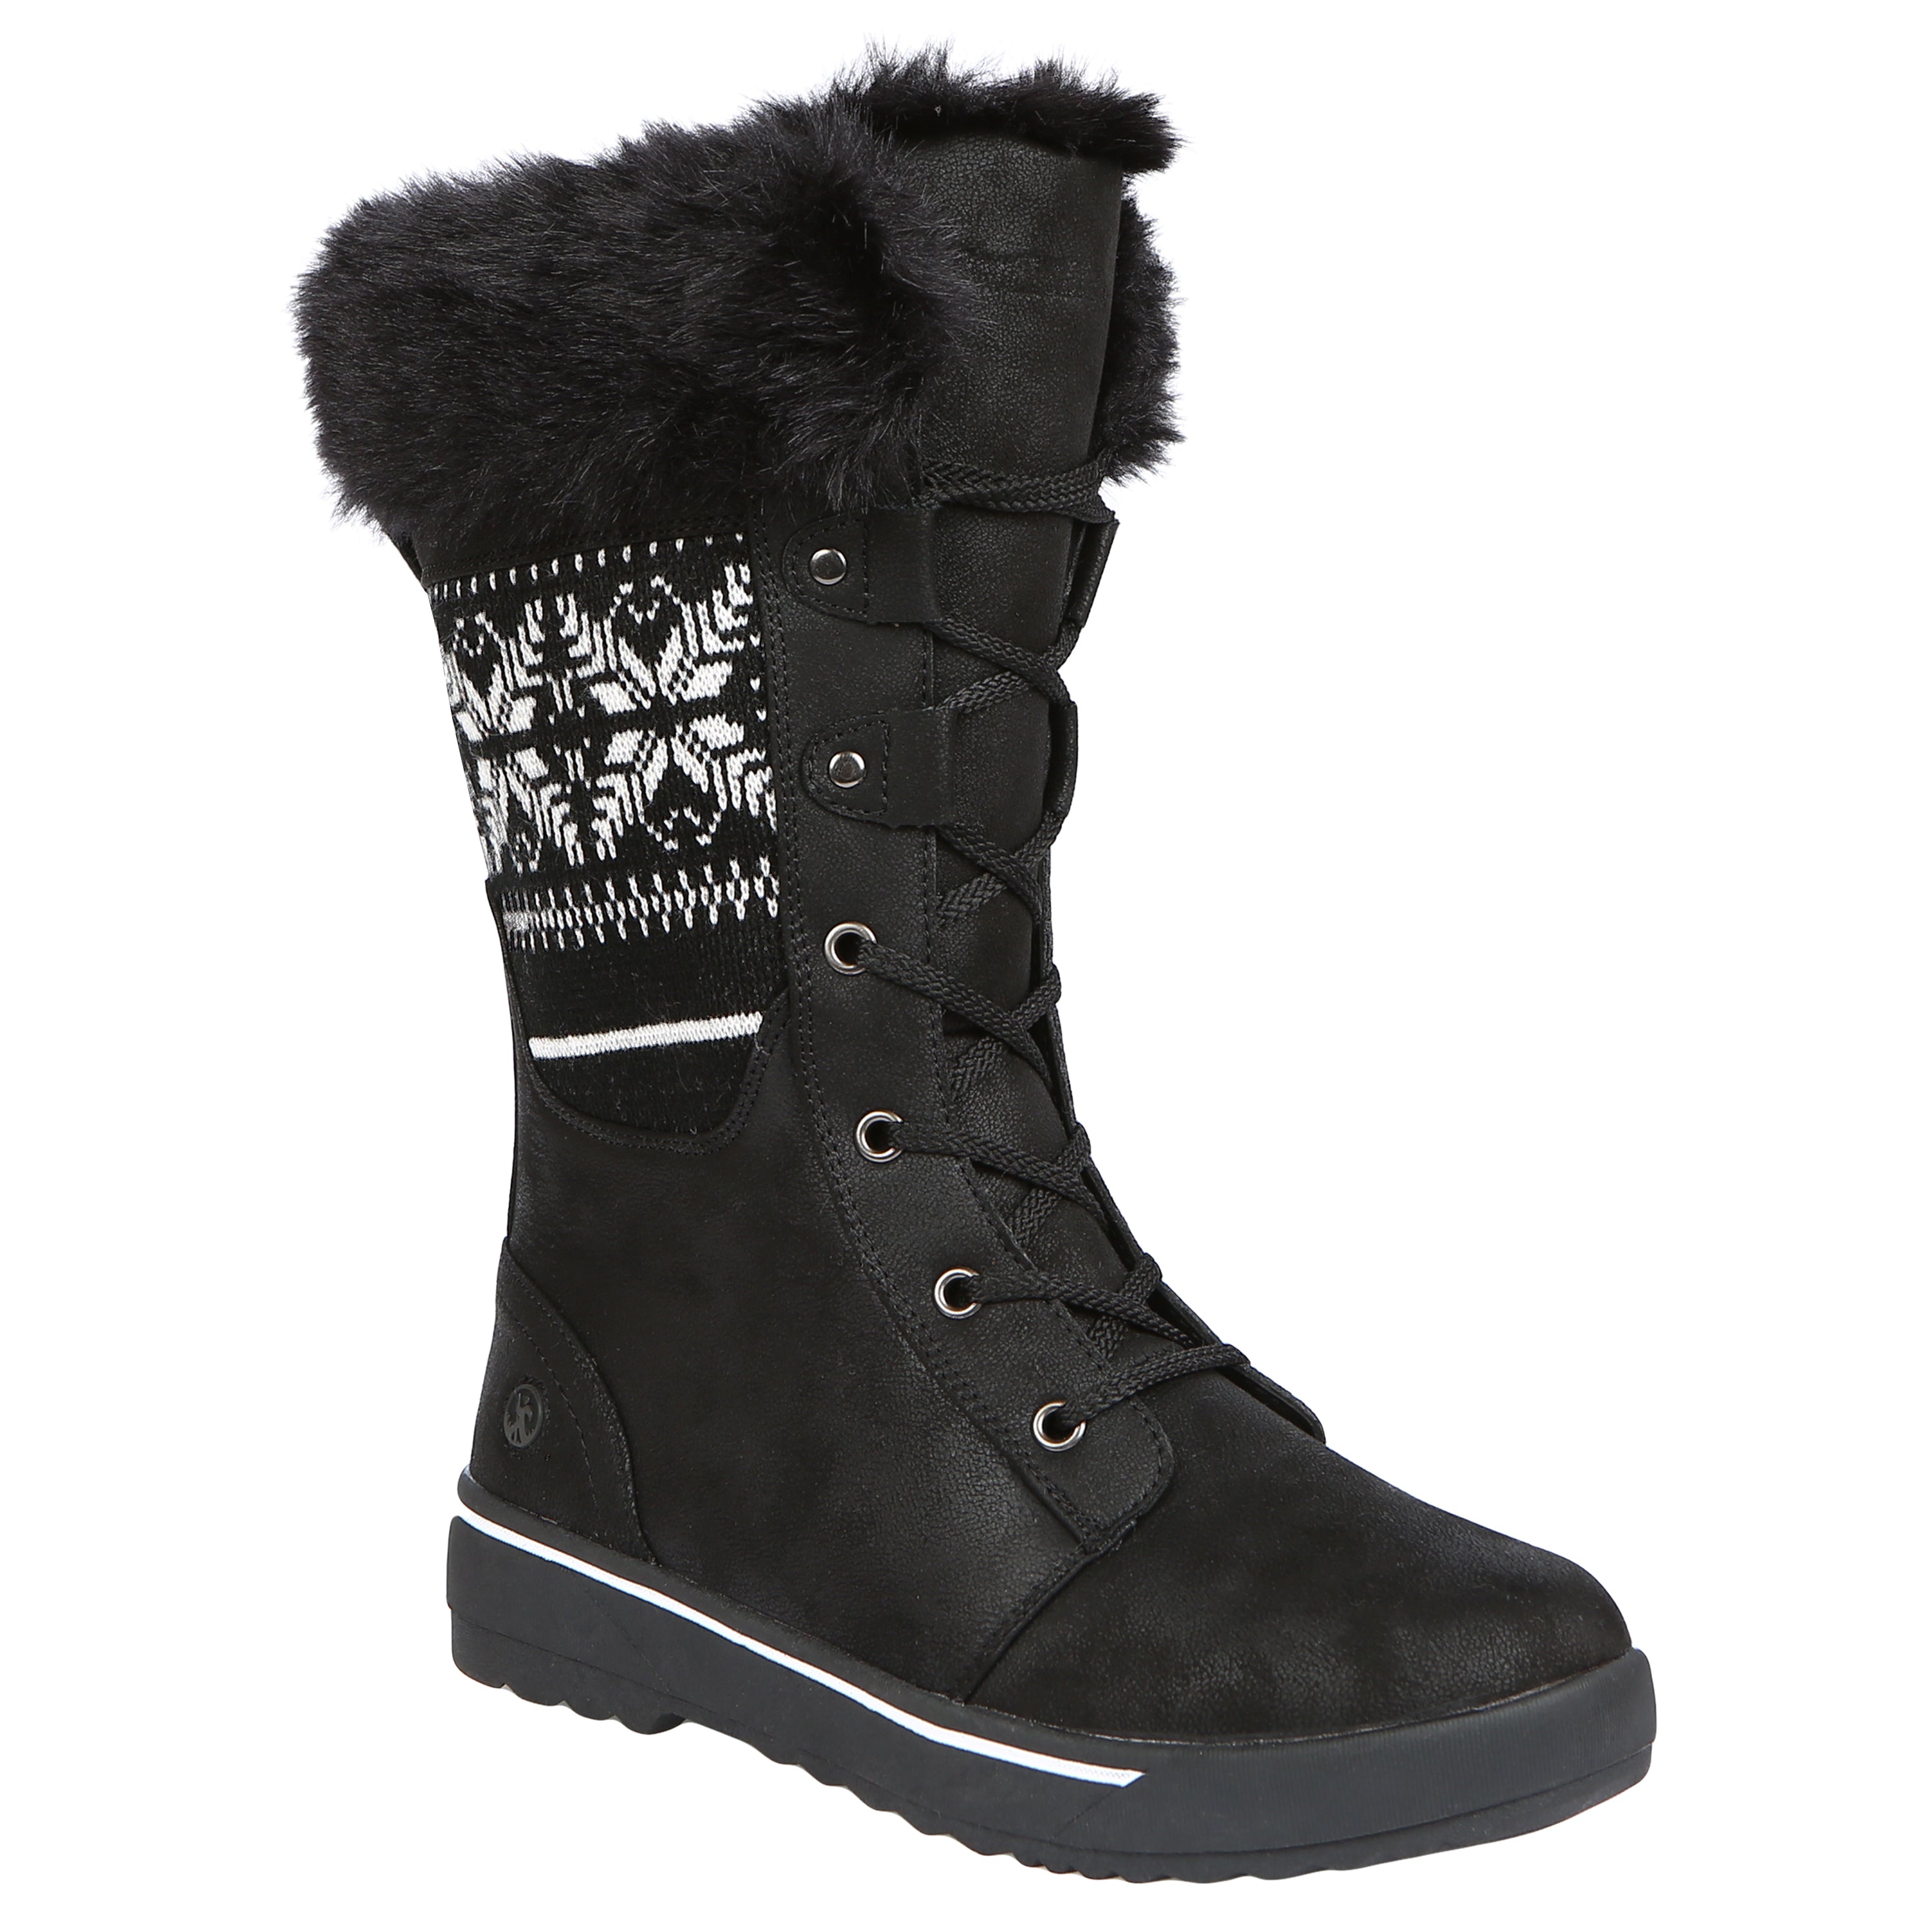 Women's Bishop SE Cold Weather Winter Boot